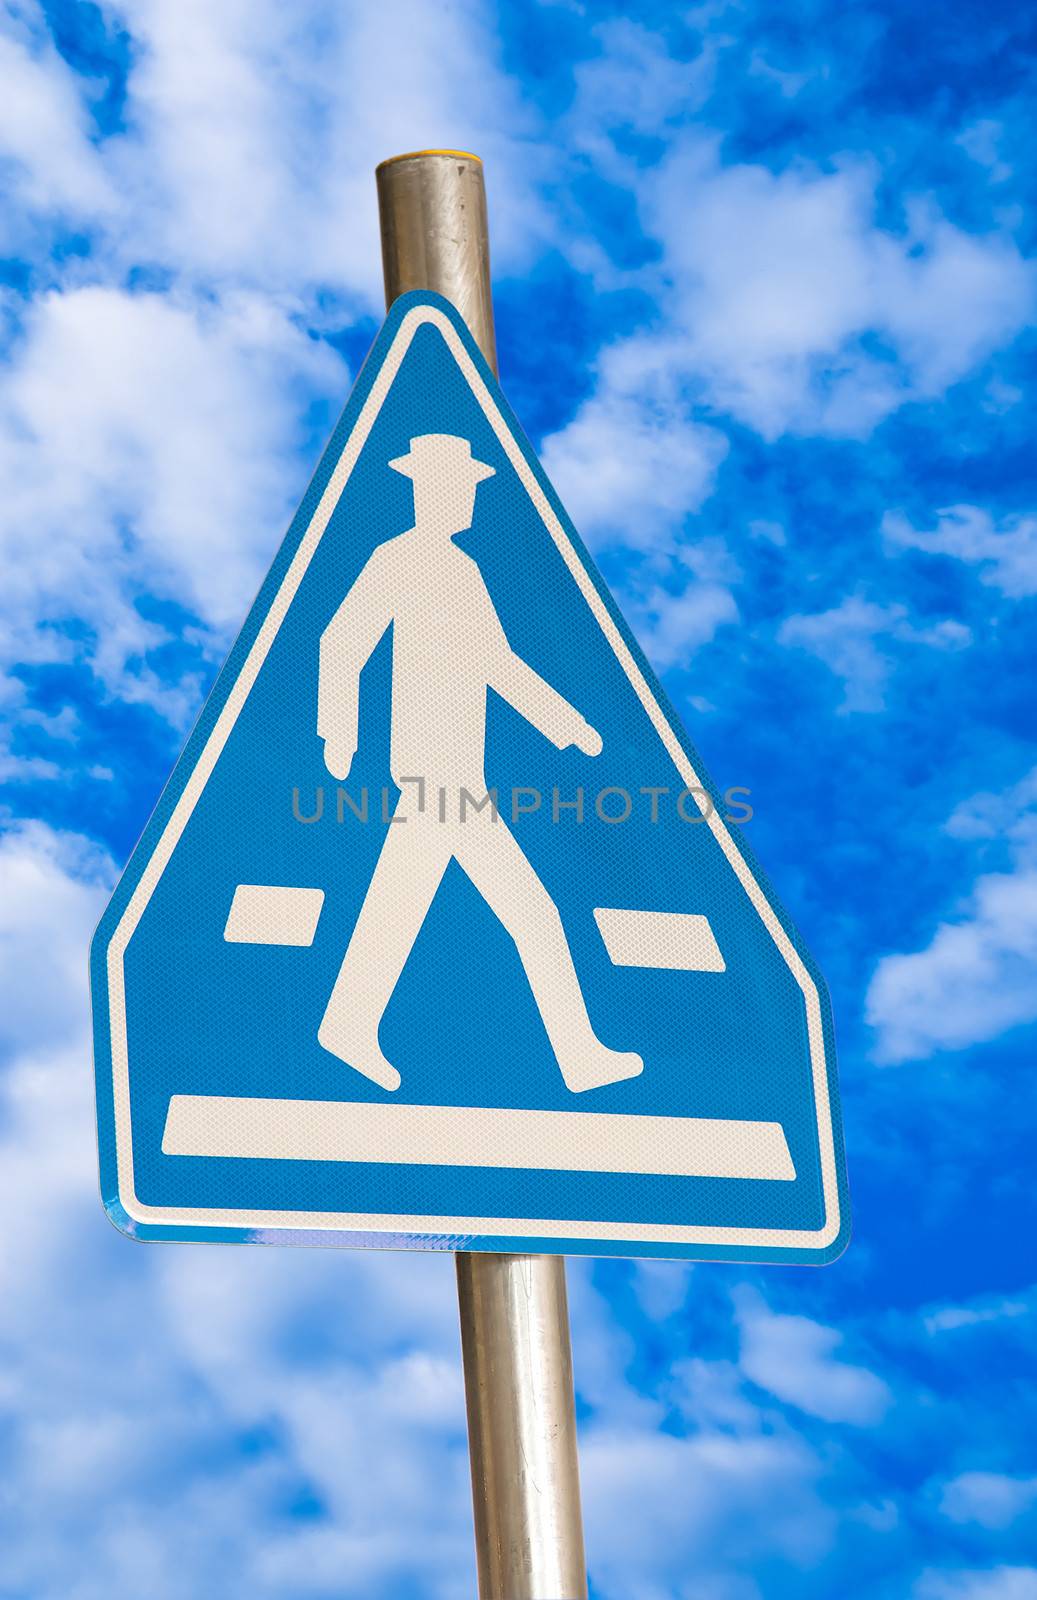 pedestrian blue traffic sign by Theeraphon